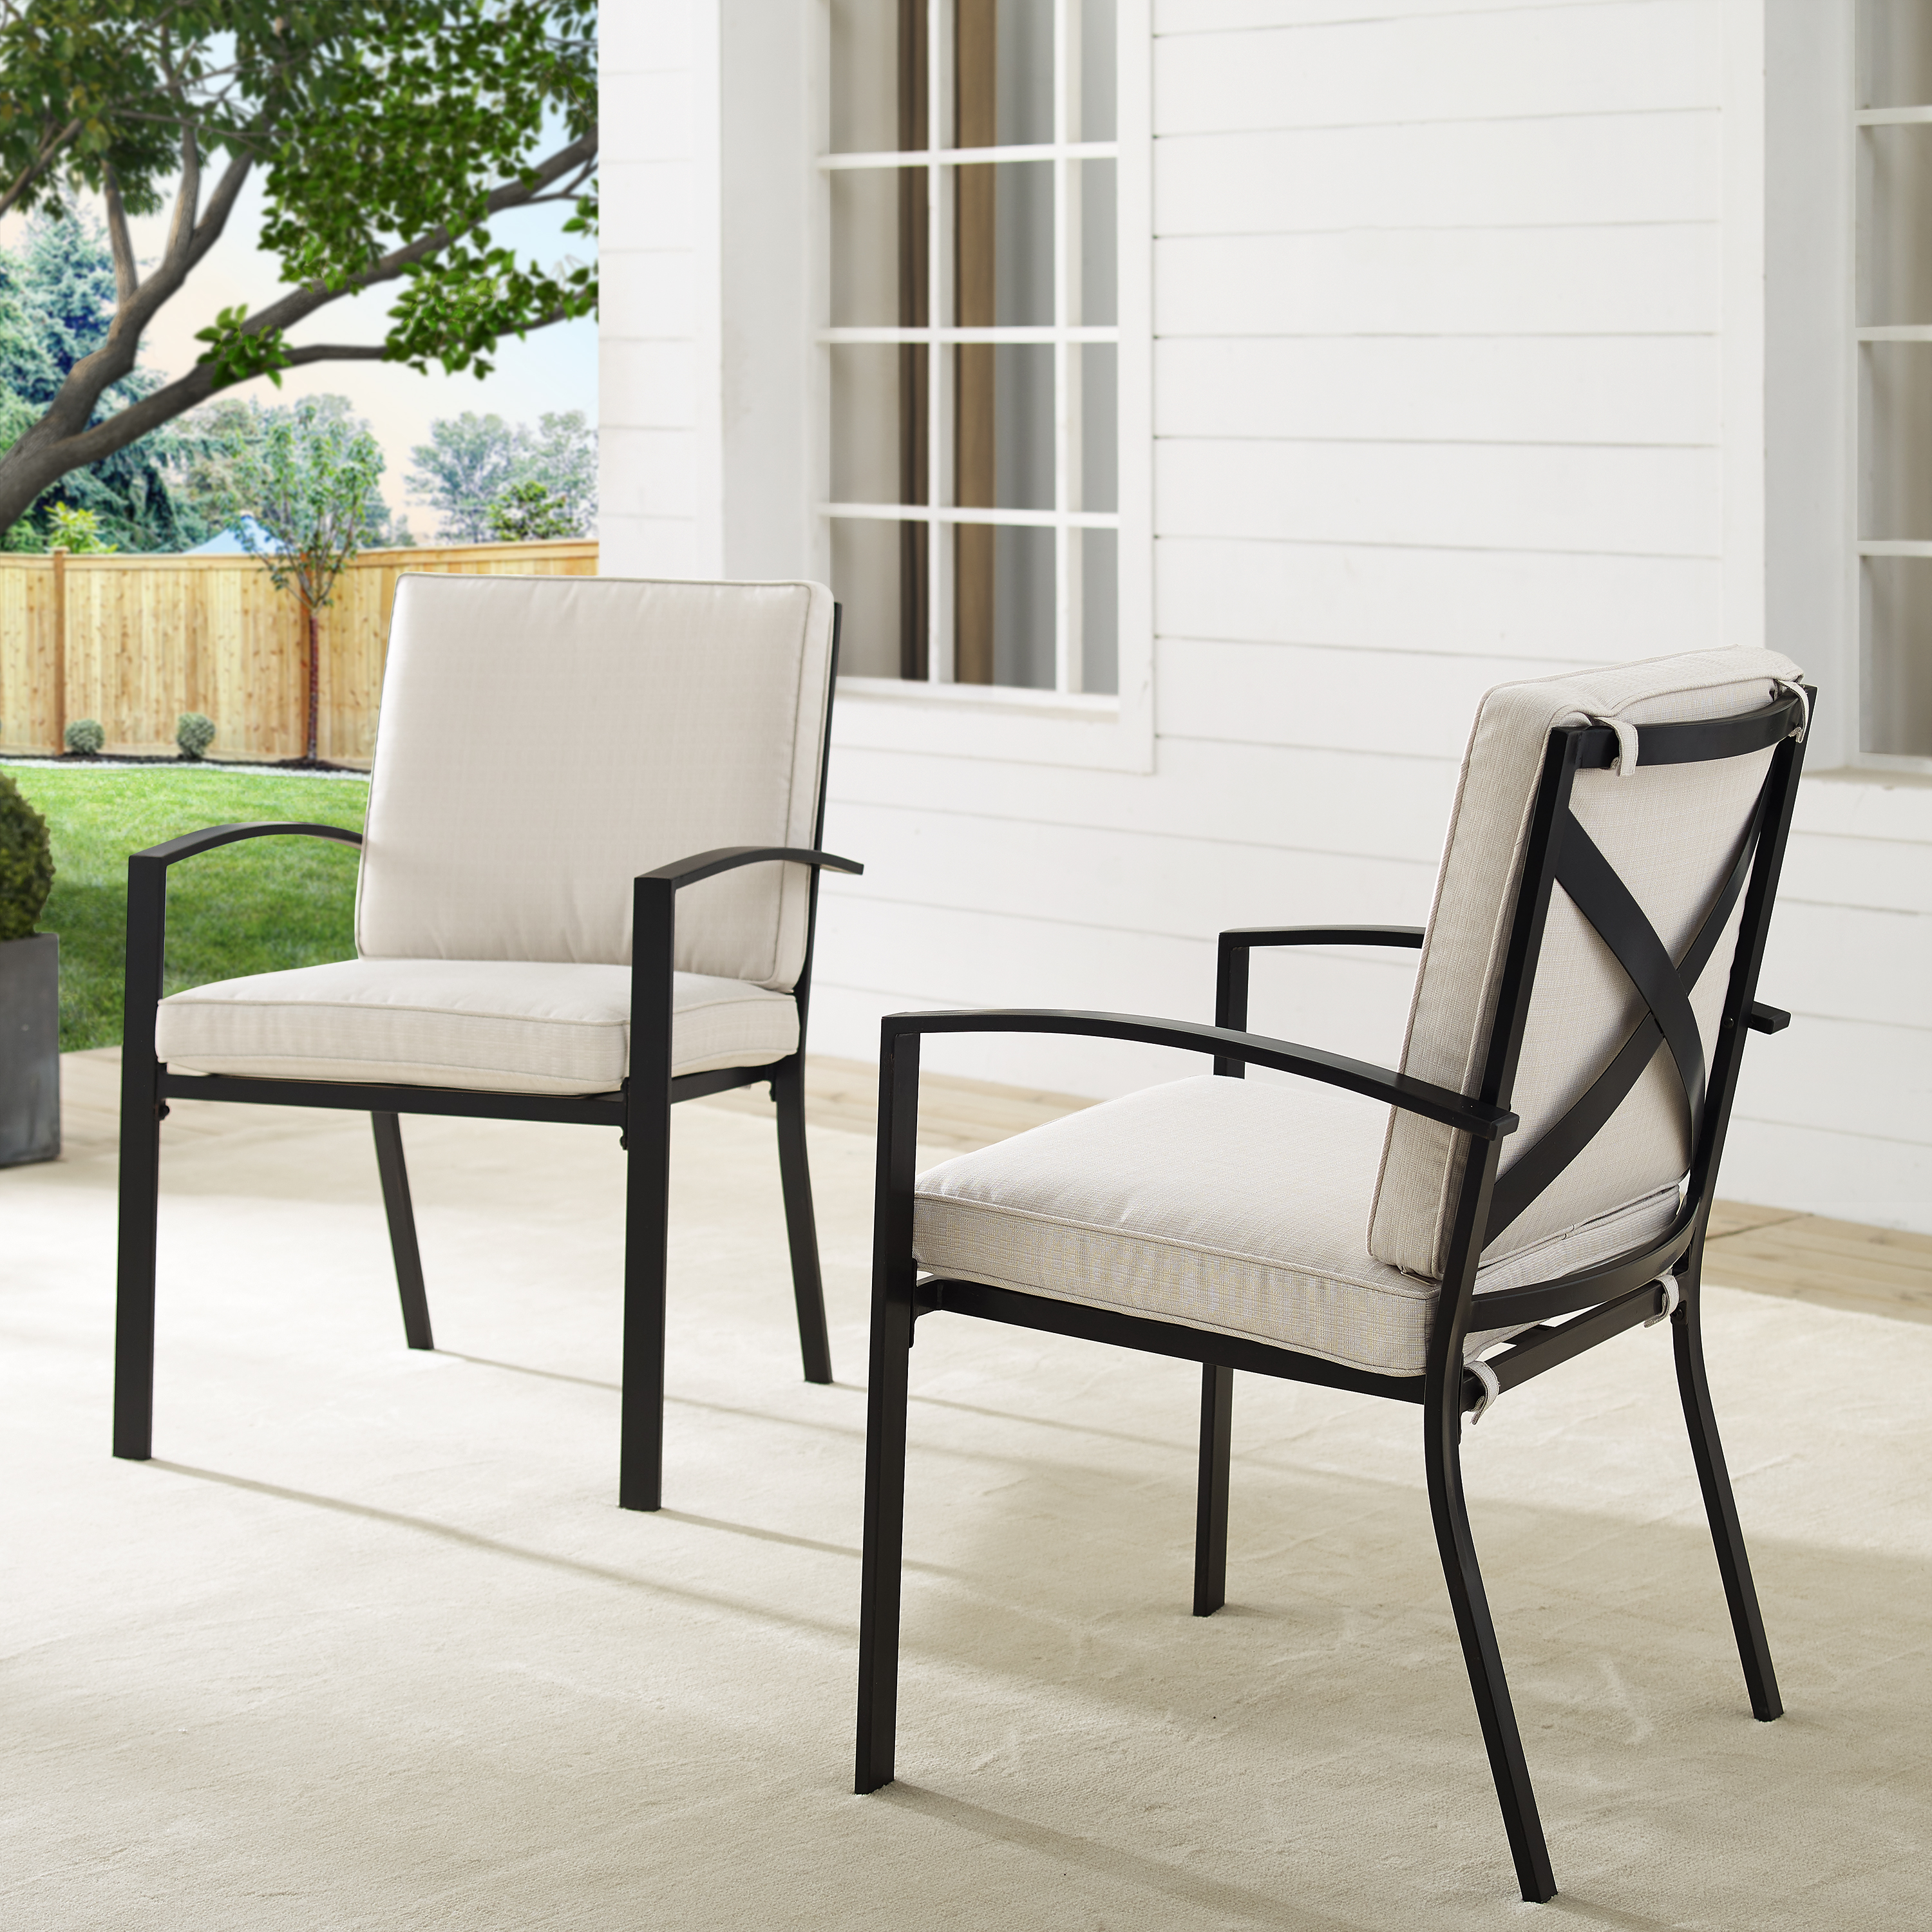 Crosley Furniture Kaplan Fabric Outdoor Dining Chair Set in Oatmeal (Set of 2) - image 2 of 12